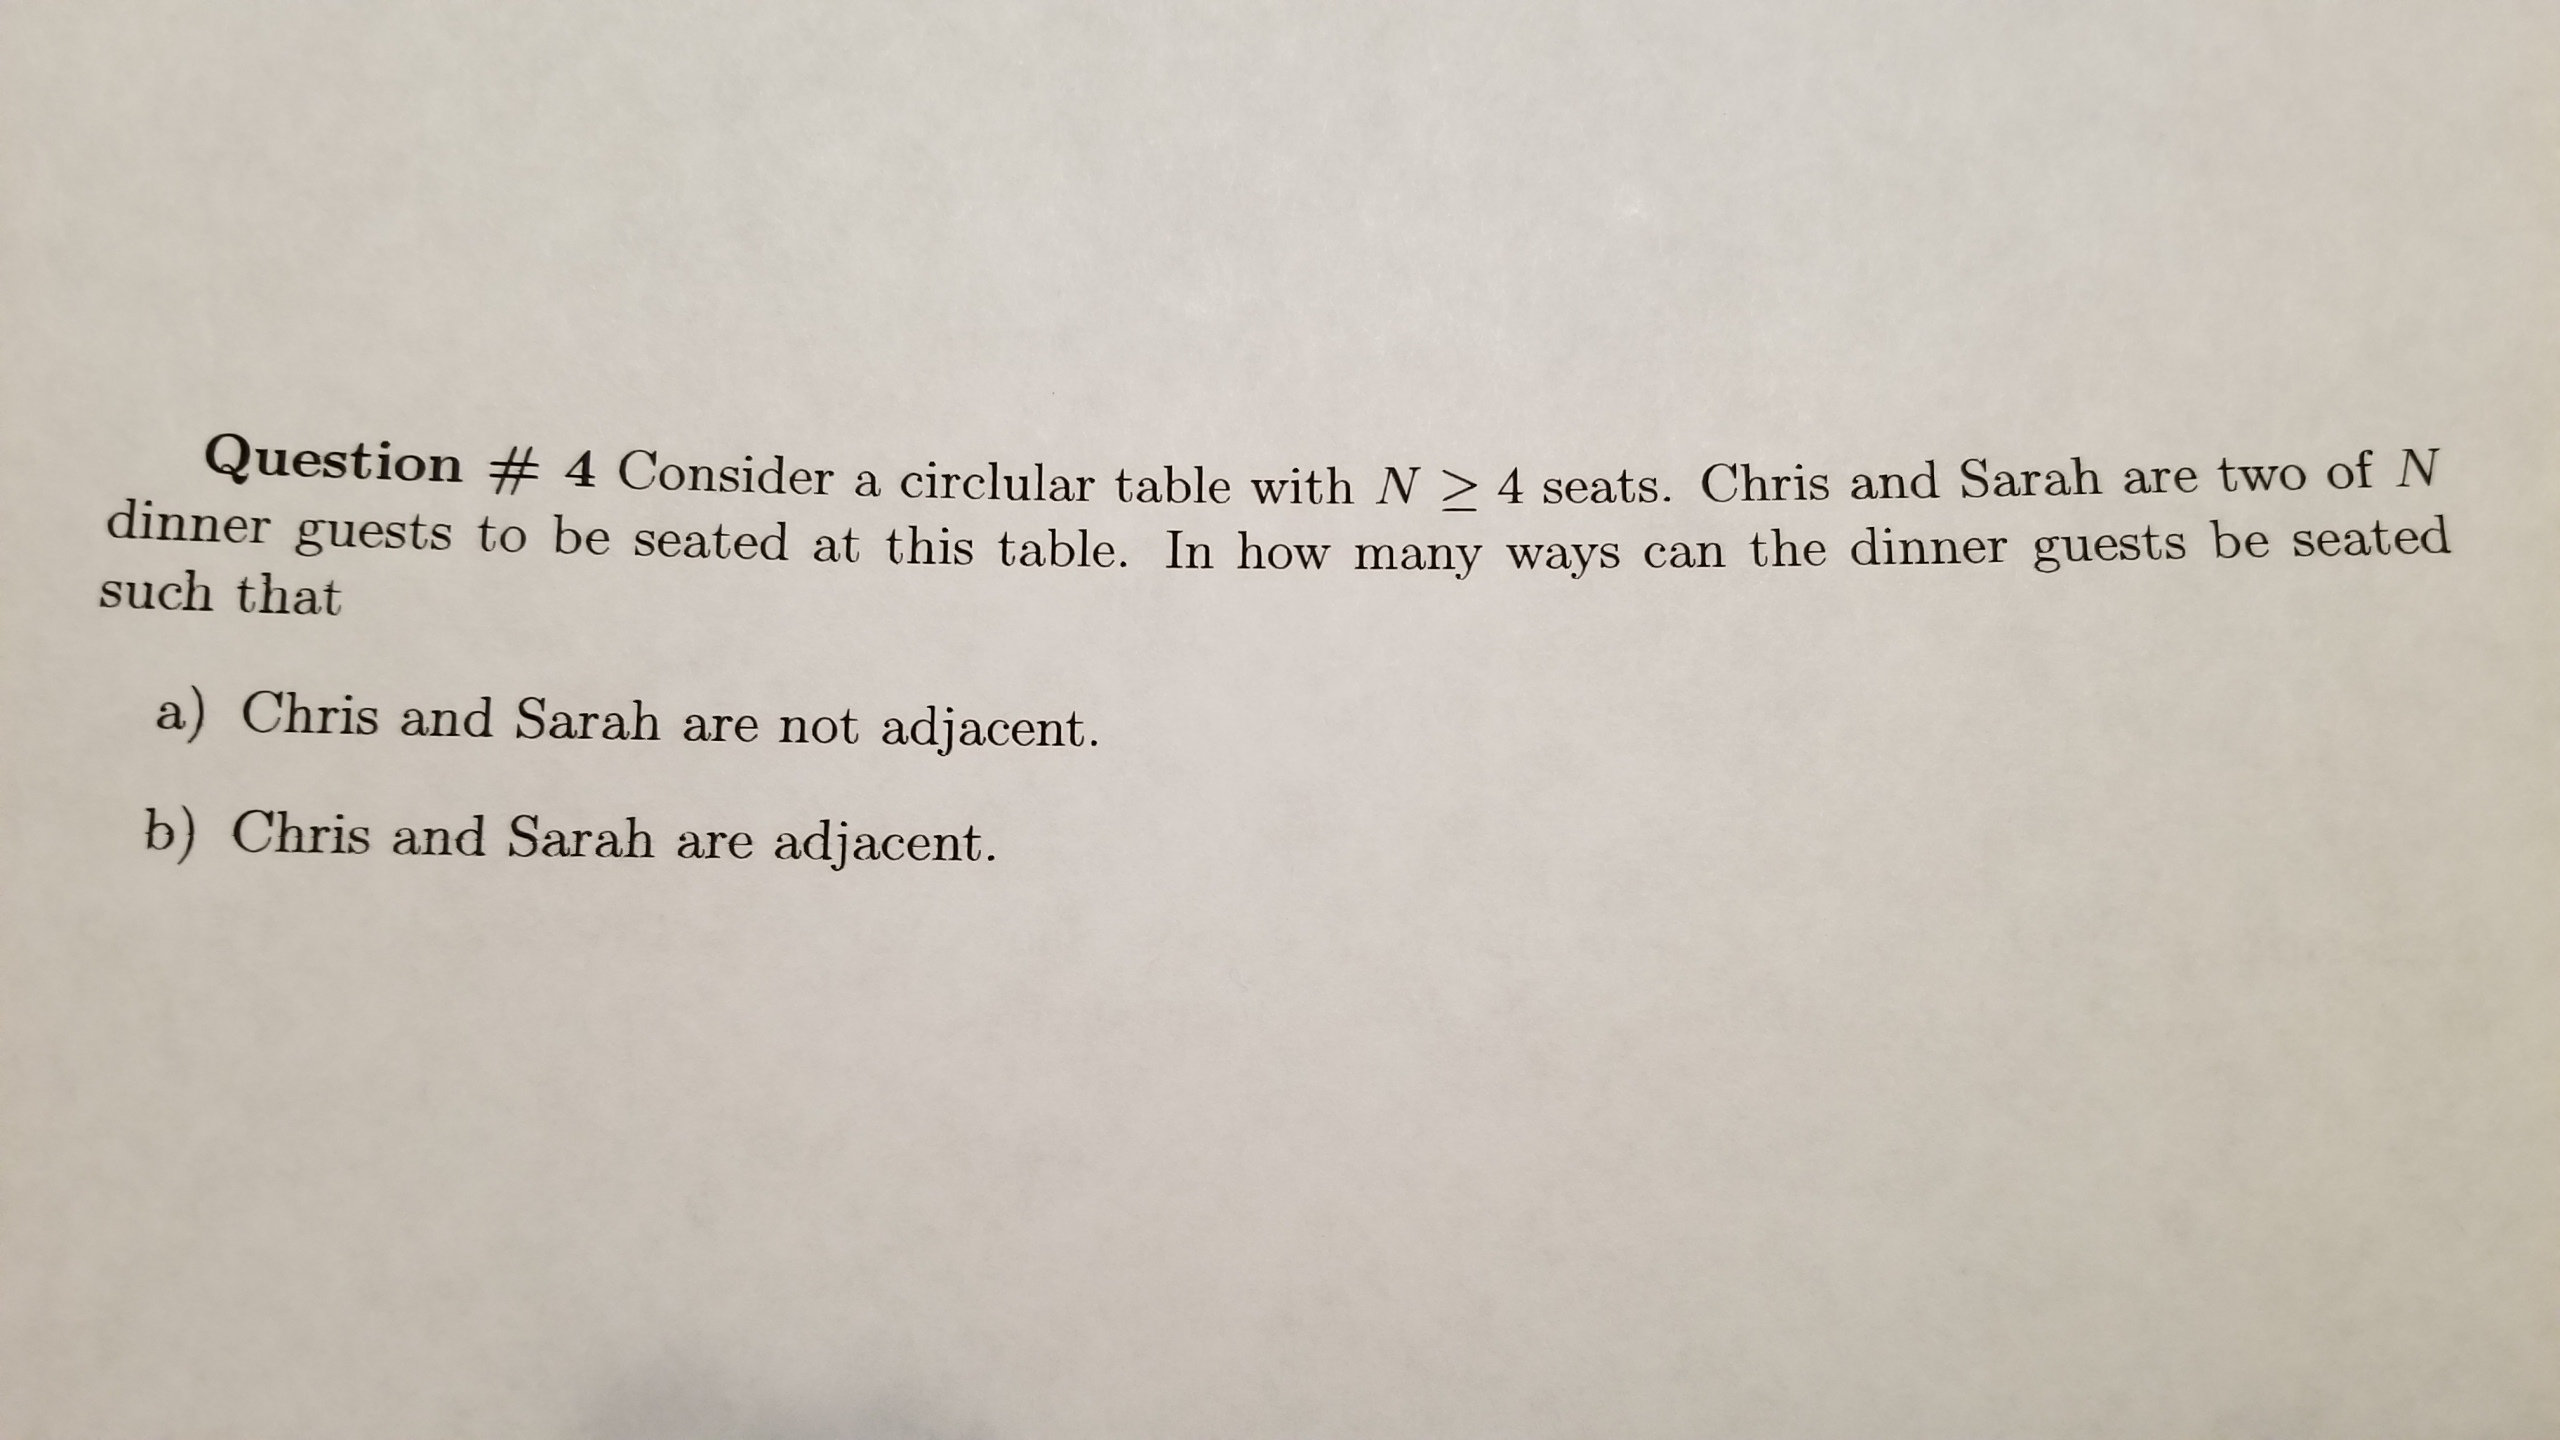 Question # 4 Consider a circular table with N > 4 seats. Chris and Sarah are two of N
th at ests to be seated at this table. In how many ways can the dinner guests be seated
a) Chris and Sarah are not adjacent.
b) Chris and Sarah are adjacent.
